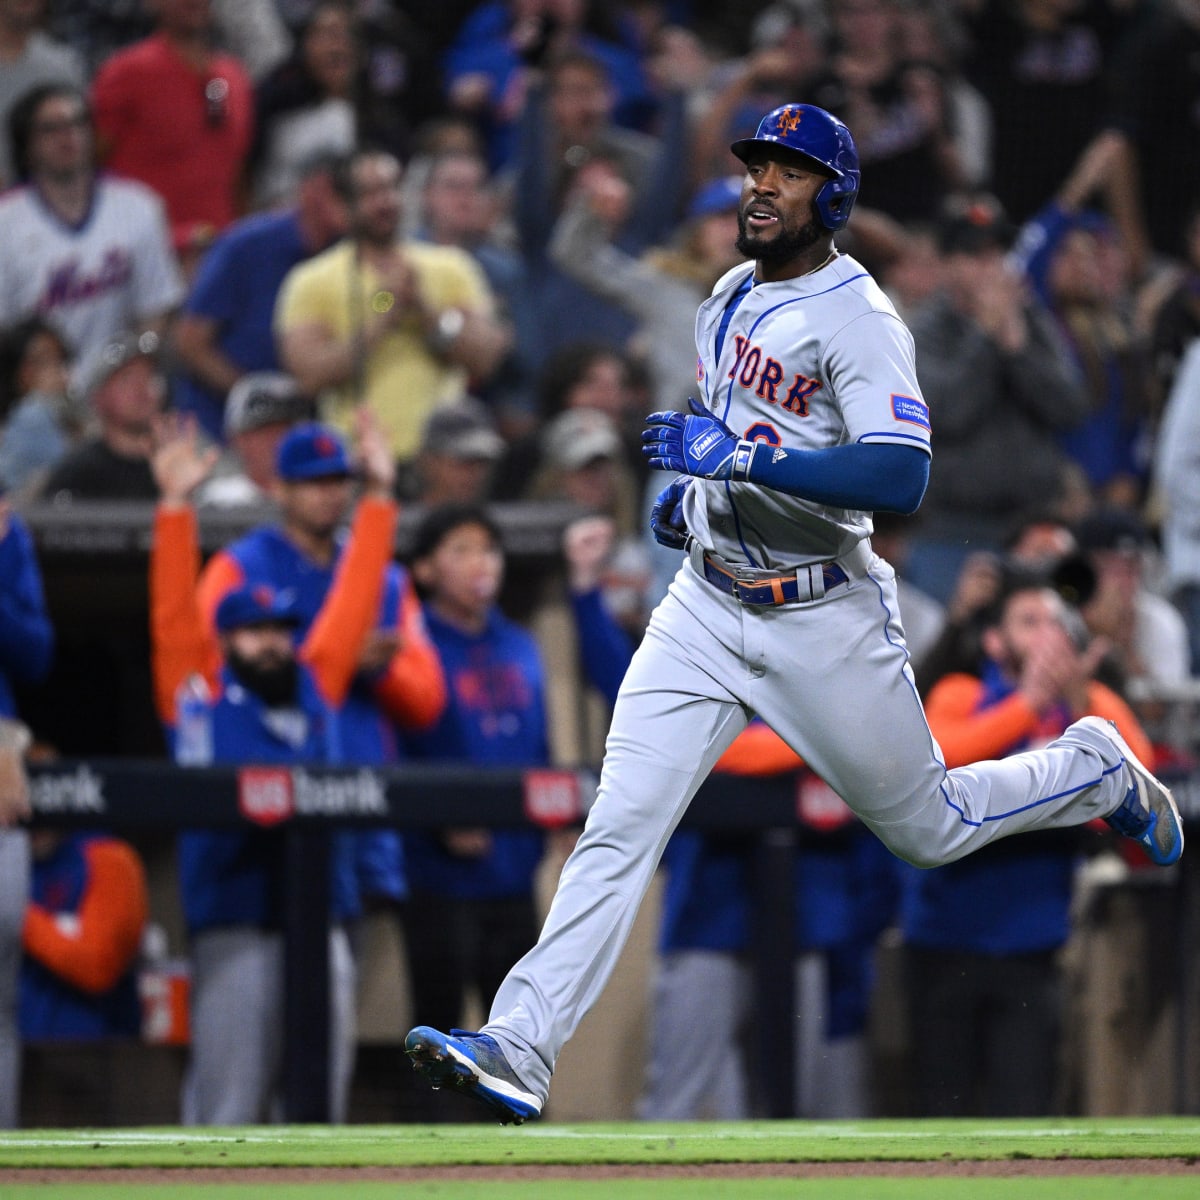 Mets Notebook: Starling Marte's return 'not imminent